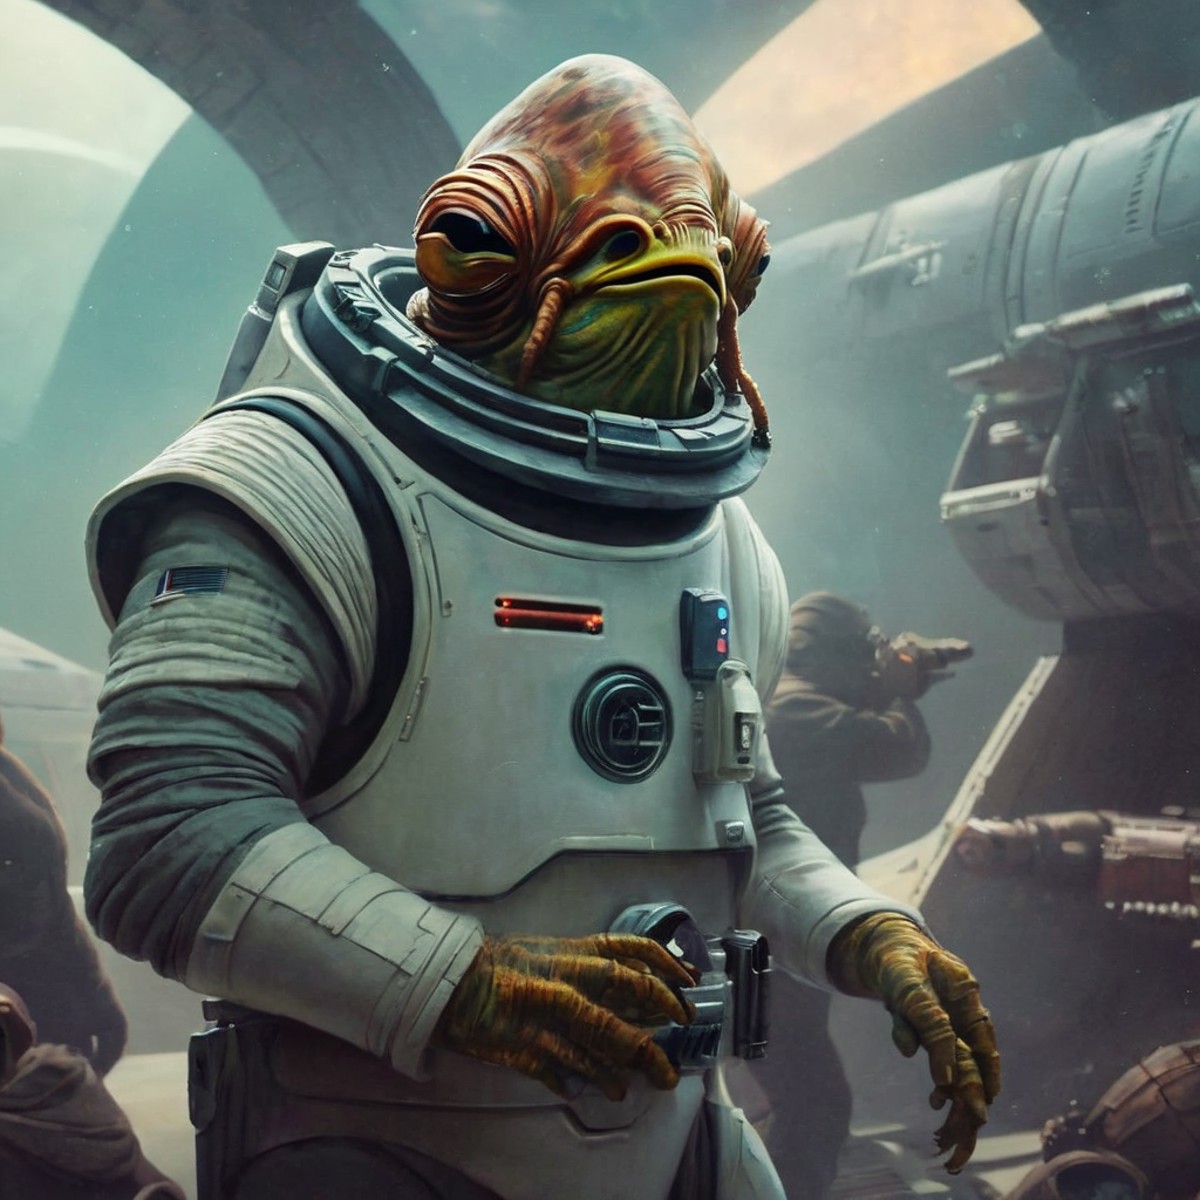 concept art of  <lora:Gial Ackbar:1.2>
Gial Ackbar a painting of a creature with a spacesuit In Star Wars Universe, digita...